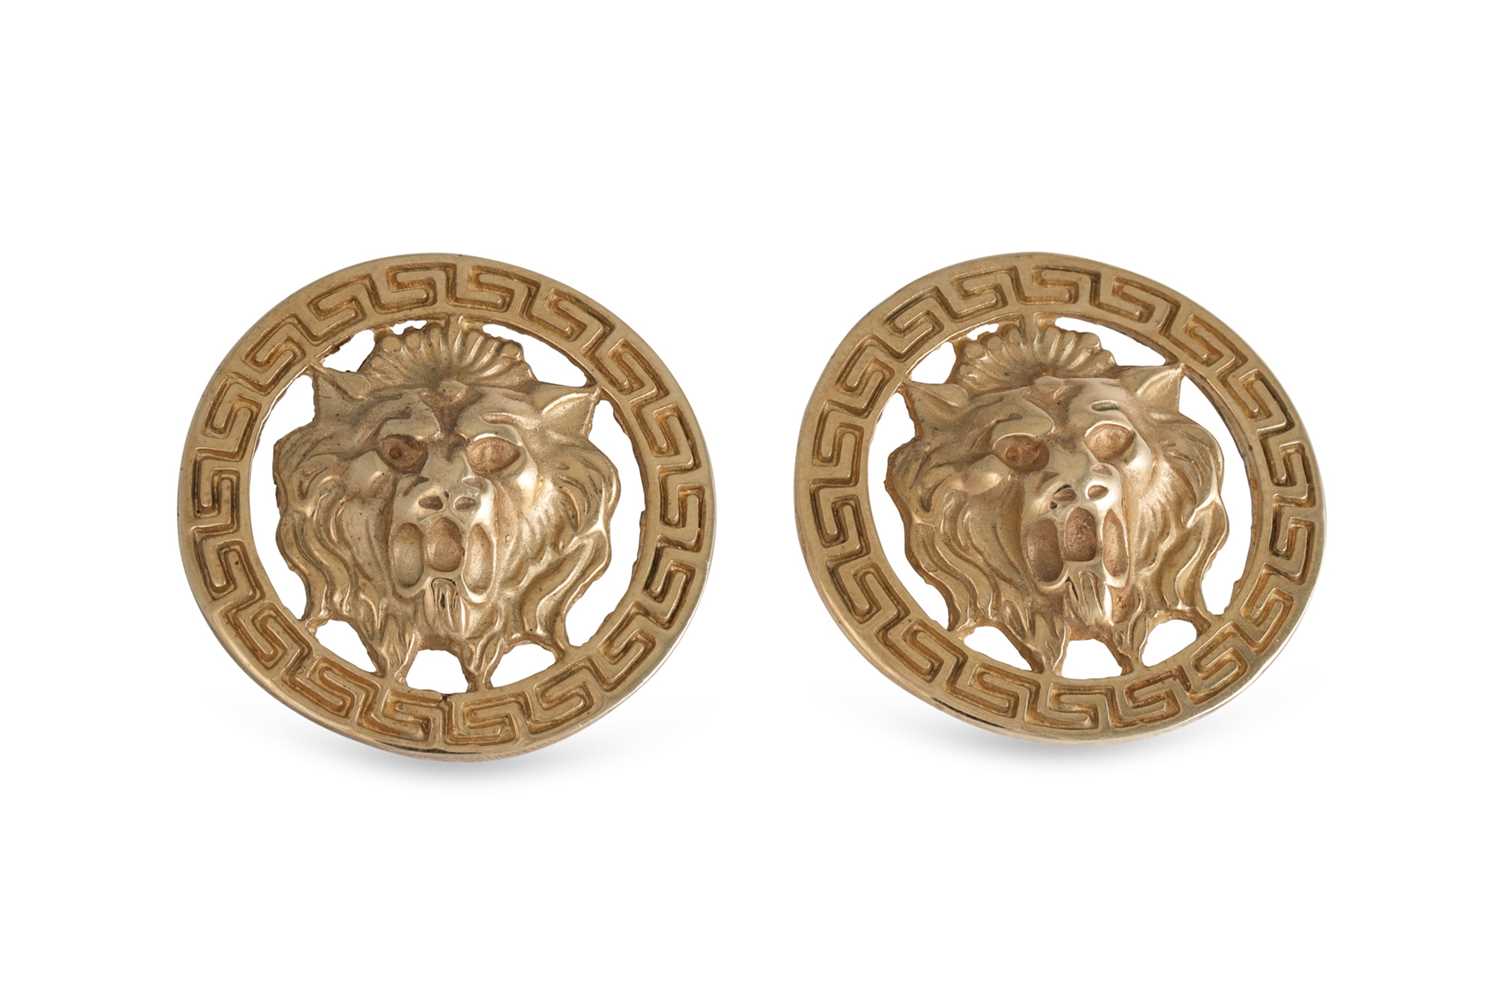 Lot 216 - A PAIR OF 9CT GOLD GUCCI STYLE EARRINGS, Greek...